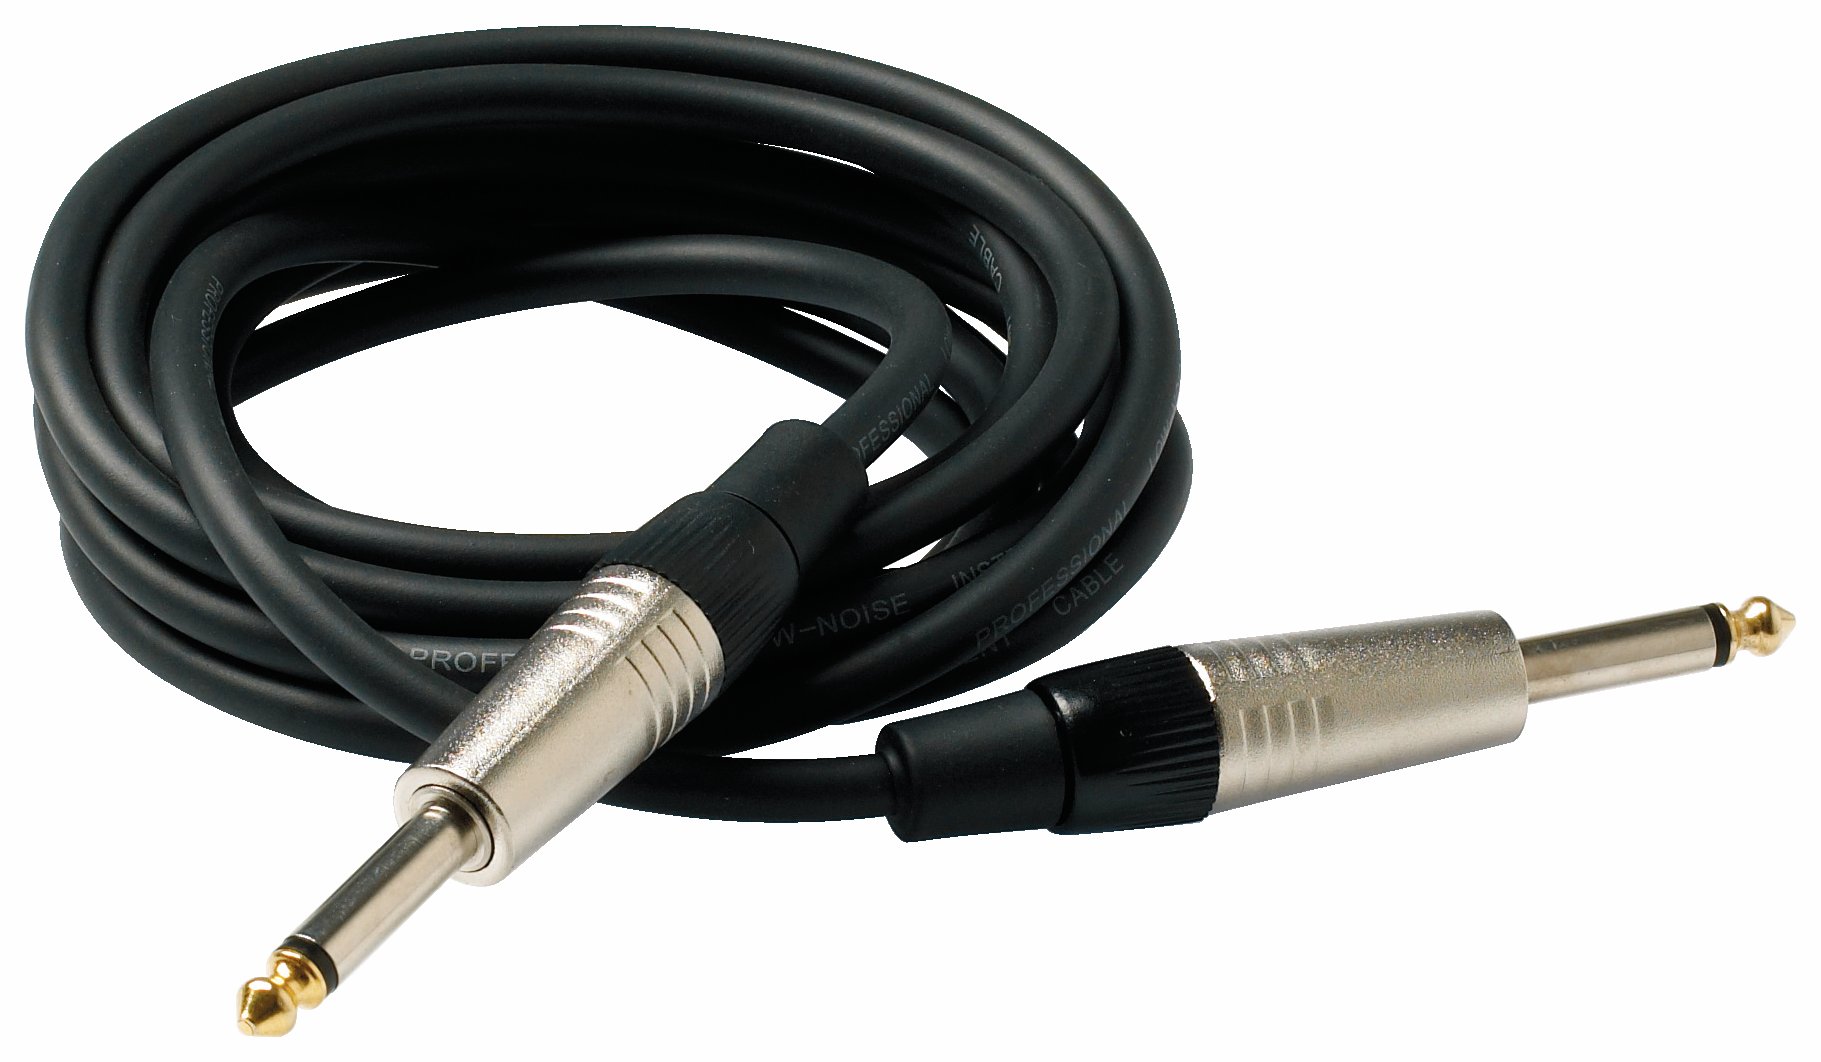 RockCable Instrument Cable - straight TS (6.3 mm / 1/4"), 3 m / 9.8 ft - Black